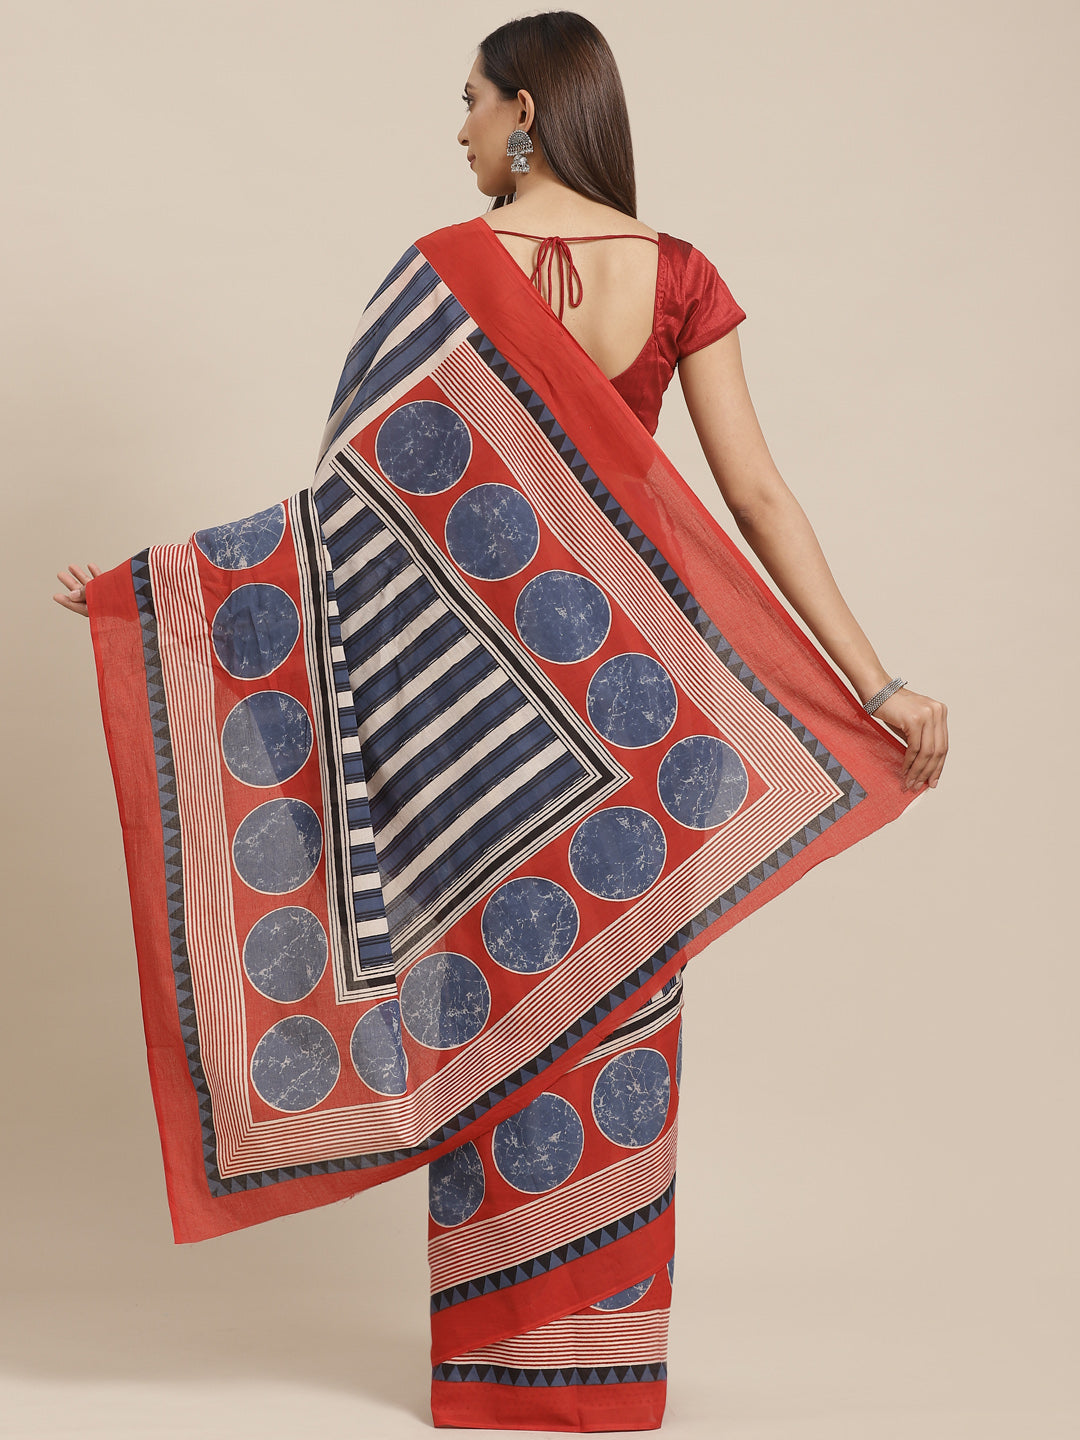 Blue and Cream, Kalakari India Pure Cotton Handblock Printed Saree and Blouse RCBGSA0029-Saree-Kalakari India-RCBGSA0029-Cotton, Geographical Indication, Hand Block, Hand Crafted, Heritage Prints, Natural Dyes, Red, Sarees, Sustainable Fabrics, Woven, Yellow-[Linen,Ethnic,wear,Fashionista,Handloom,Handicraft,Indigo,blockprint,block,print,Cotton,Chanderi,Blue, latest,classy,party,bollywood,trendy,summer,style,traditional,formal,elegant,unique,style,hand,block,print, dabu,booti,gift,present,glamor